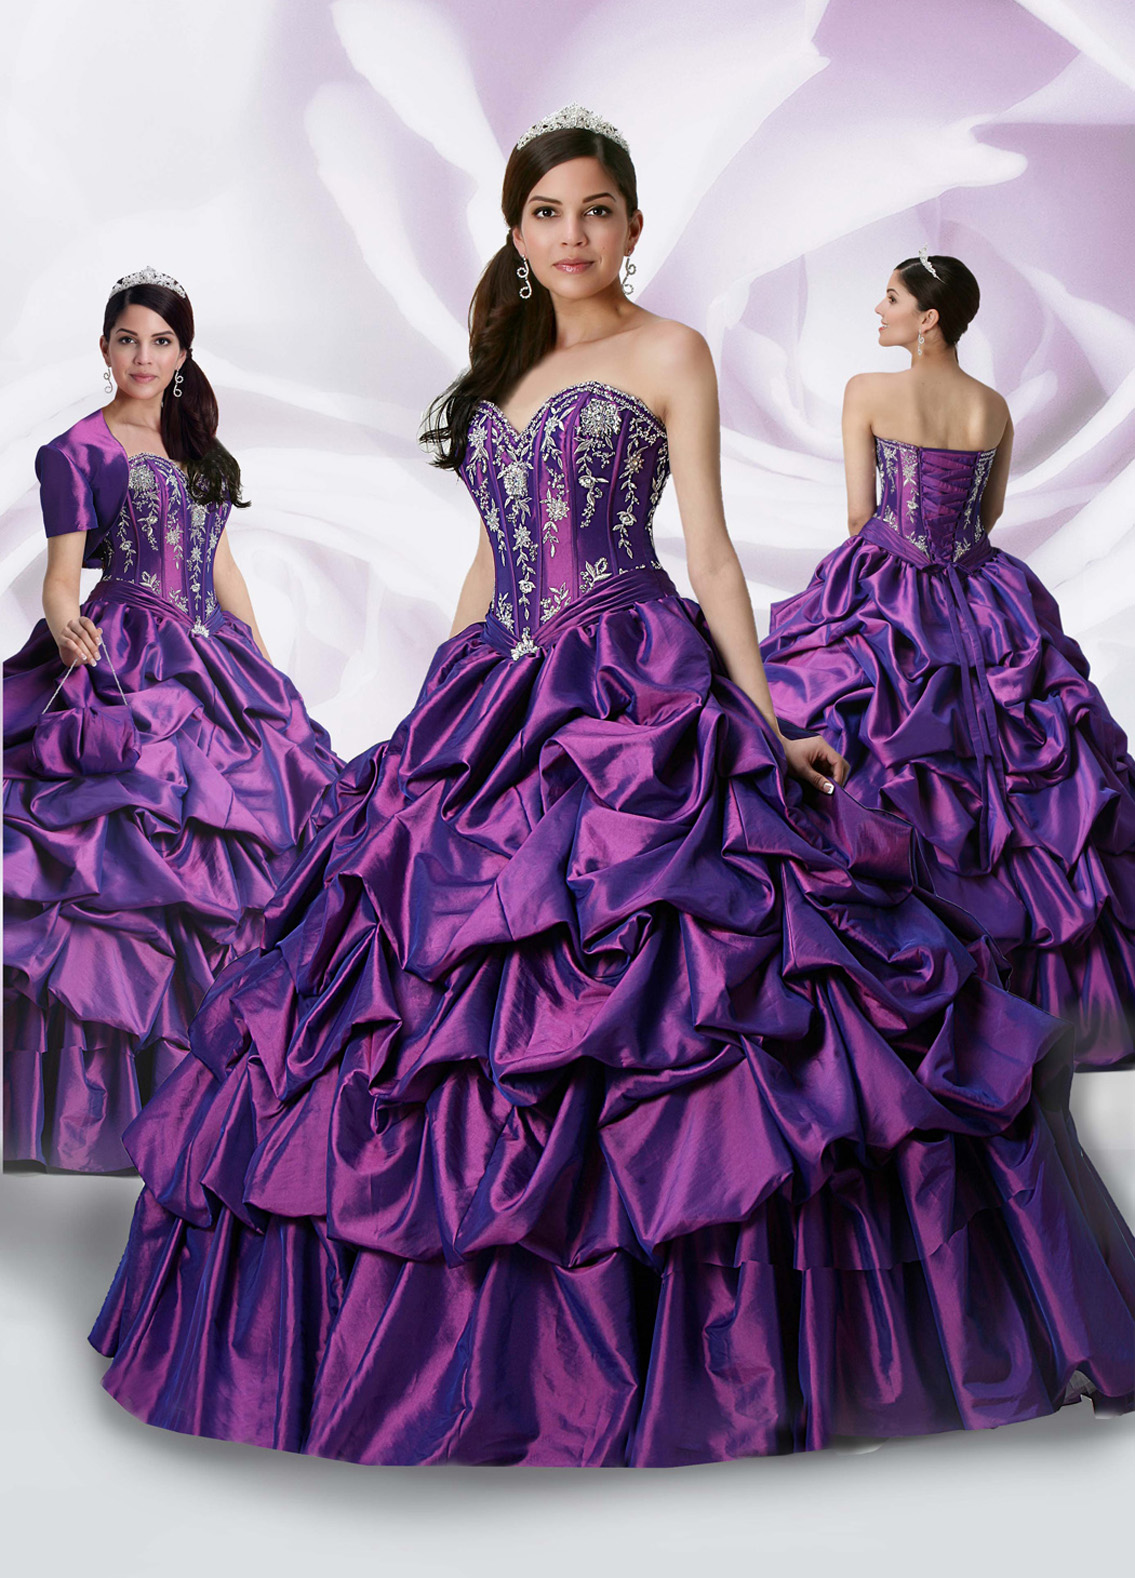 Violet Ball Gown Strapless Sweetheart Lace Up Full Length Quinceanera Dresses With Beading Embroidery And Ruffles 